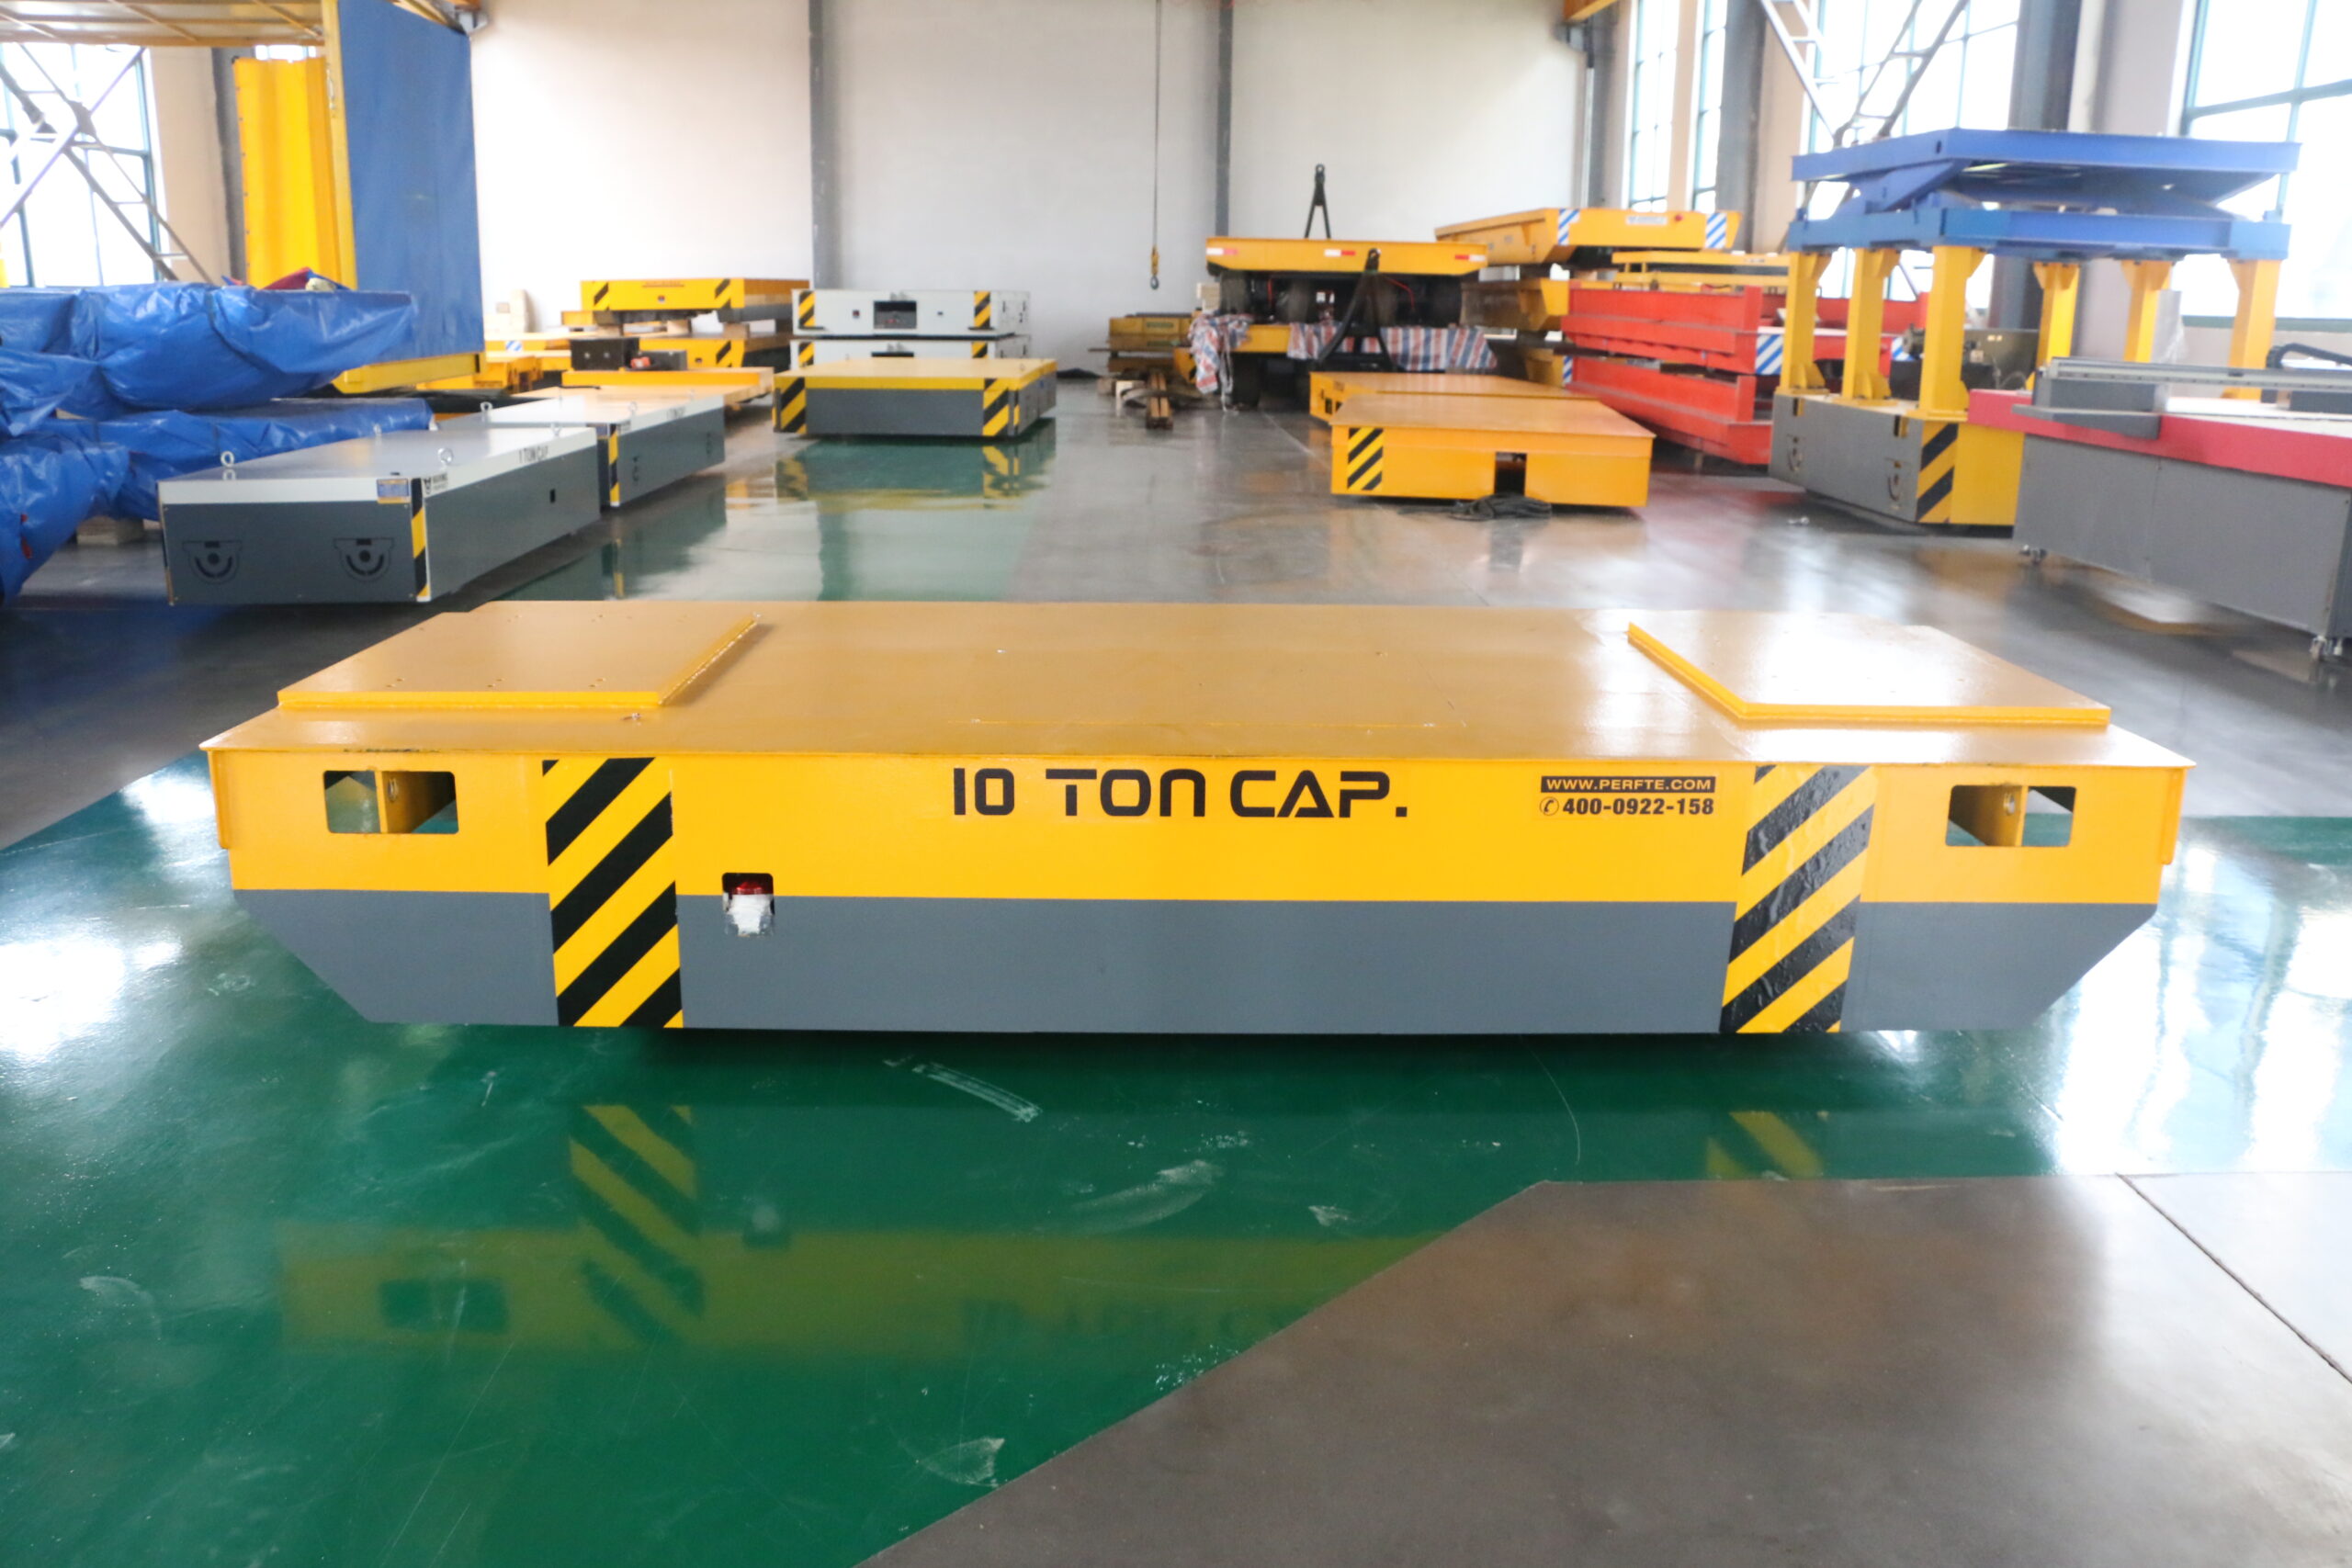 20ml headspace vialRail transfer cart carrying a weight of 10 tons tools